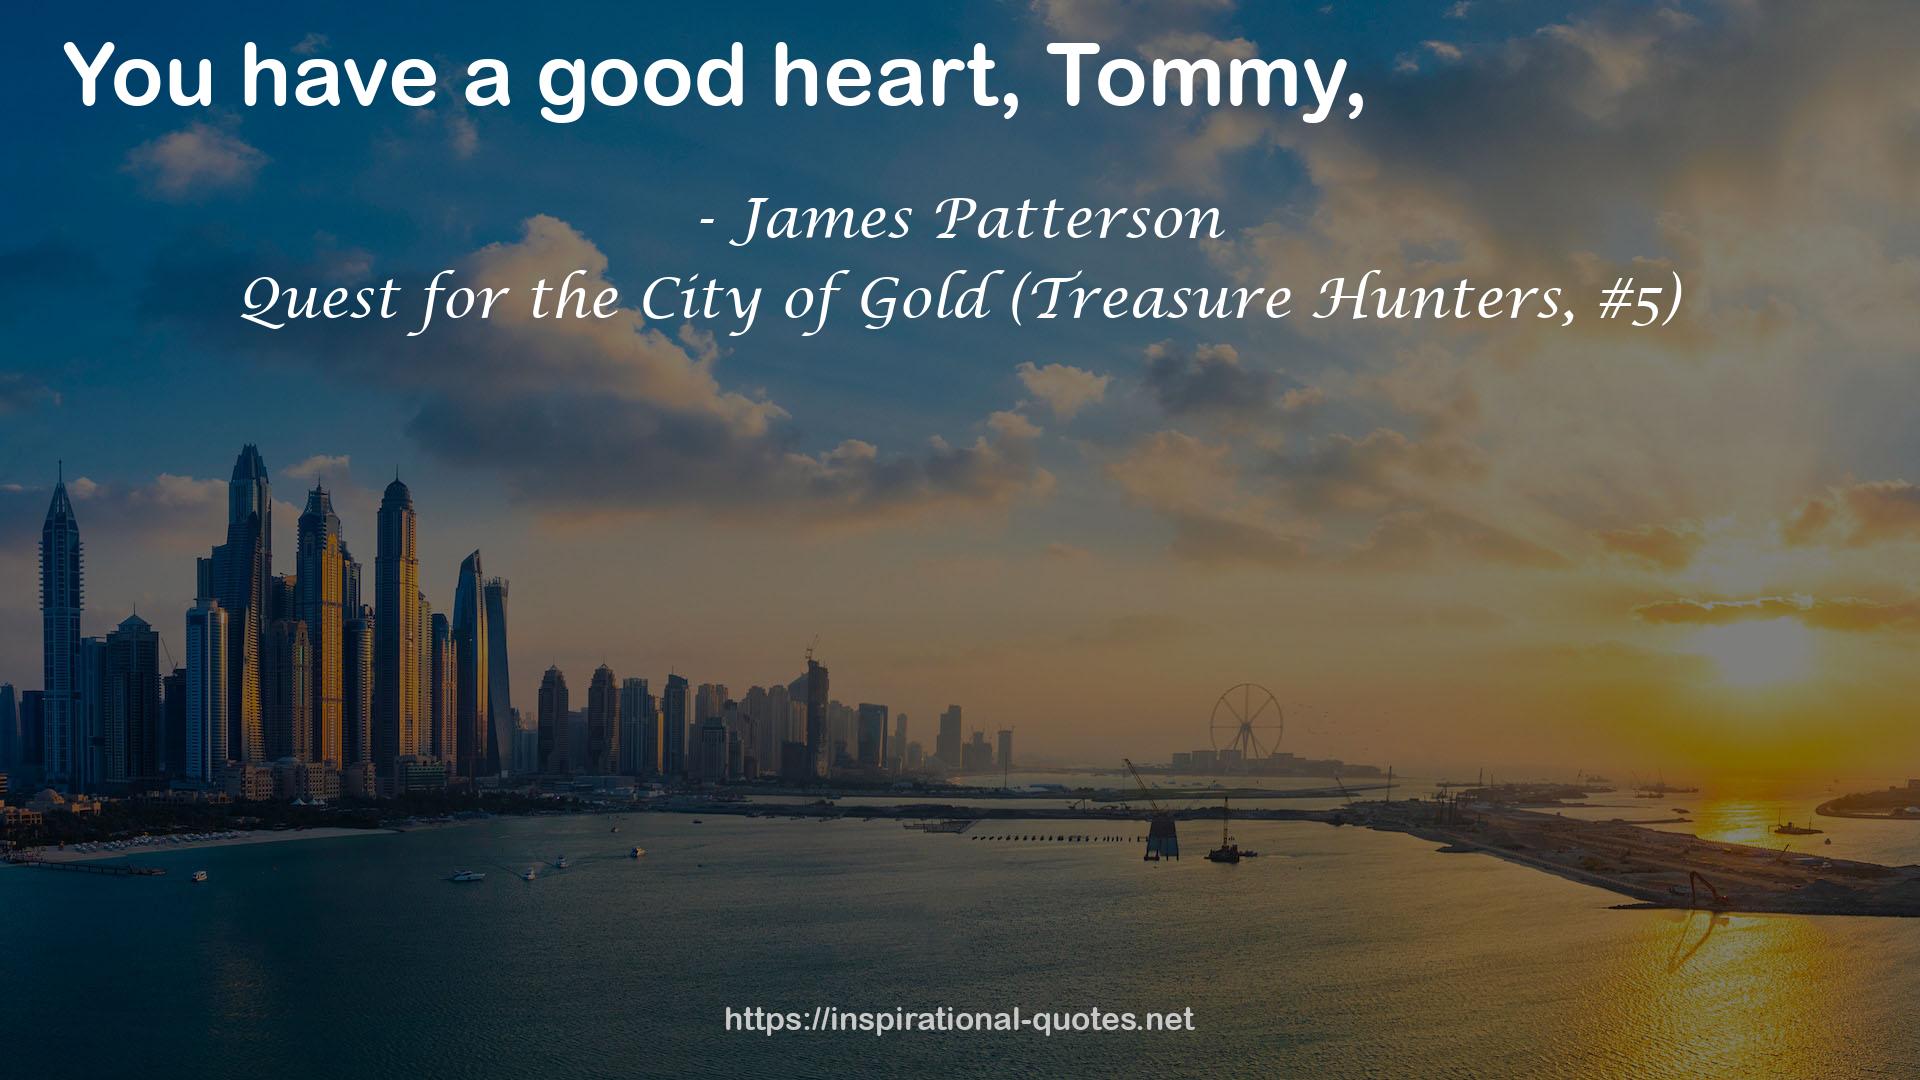 Quest for the City of Gold (Treasure Hunters, #5) QUOTES